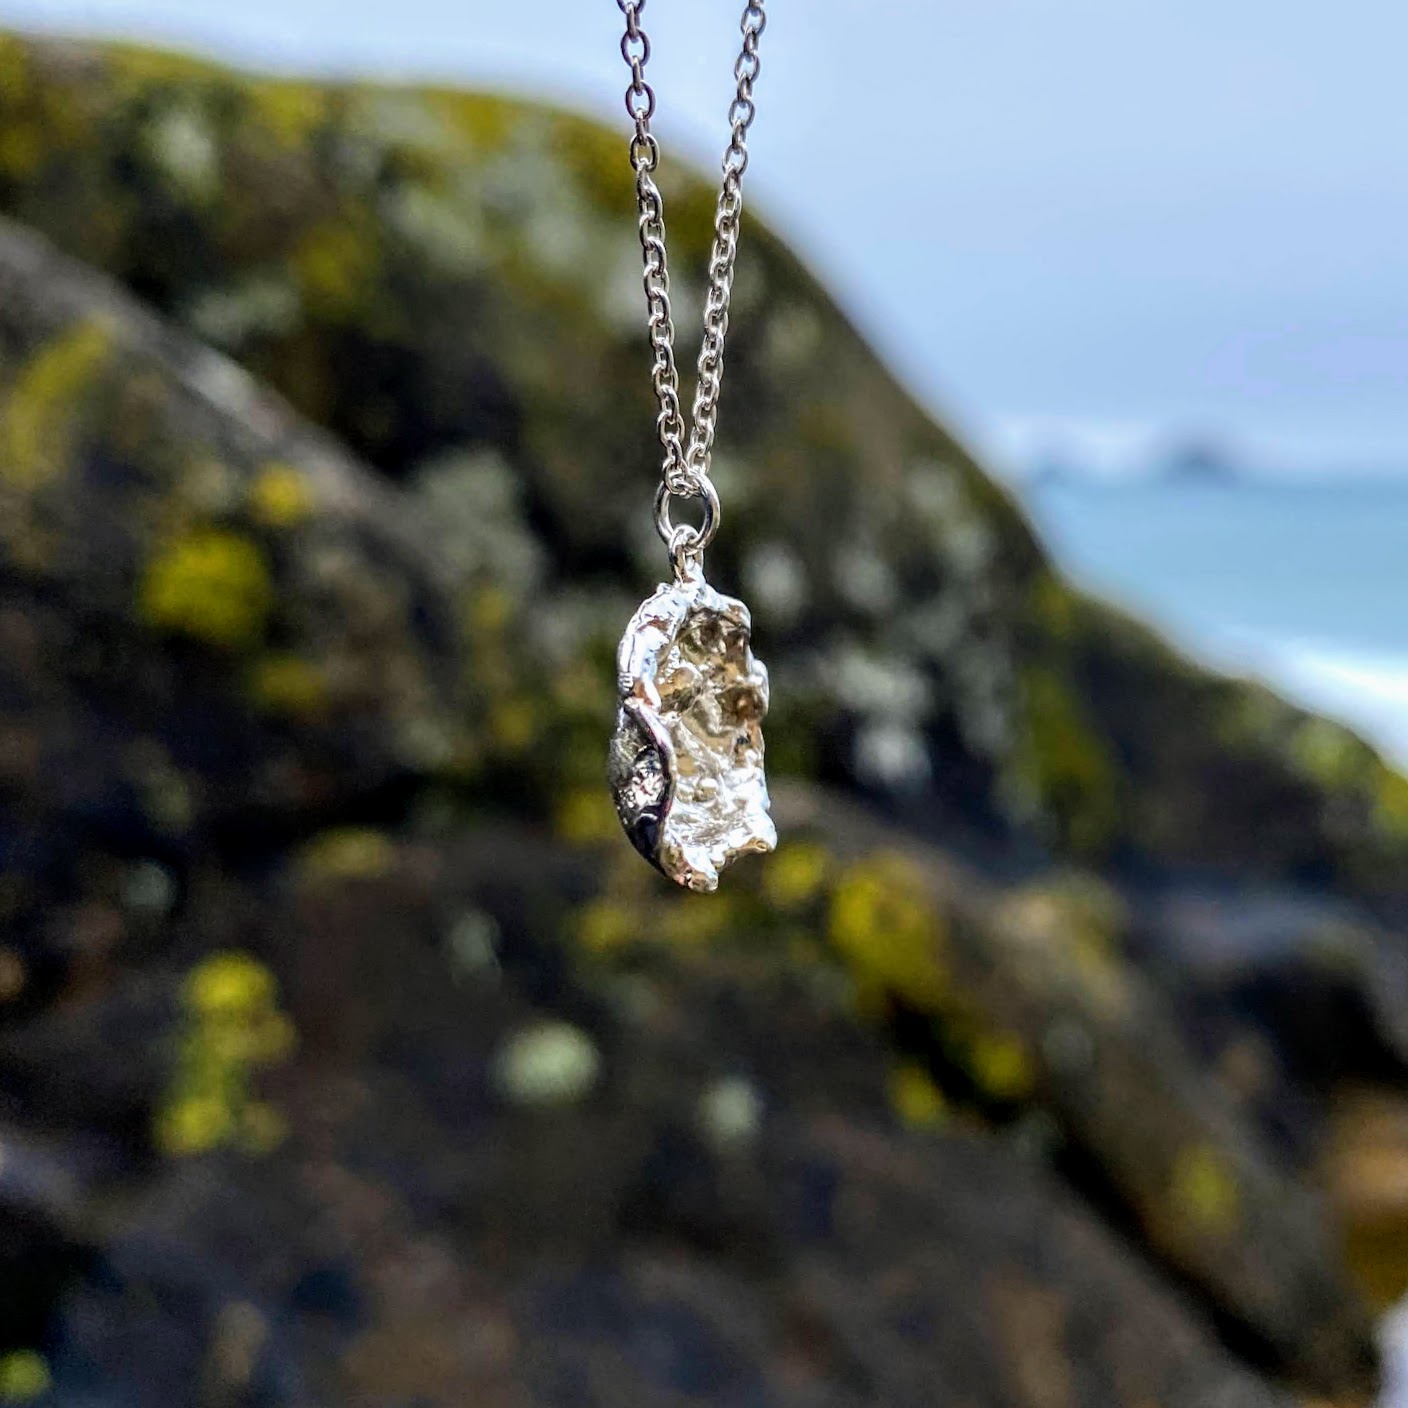 Imagine a stunning sterling silver pendant inspired by the sea, featuring a natural texture and charming organic shape. Crafted by pouring molten silver into the sea, its unique form captures the essence of ocean waves. As sunlight dances upon it, the pendant comes alive, showcasing its intricate details and textures. Picture it photographed on a picturesque beach in Cornwall, close to where it was lovingly created.